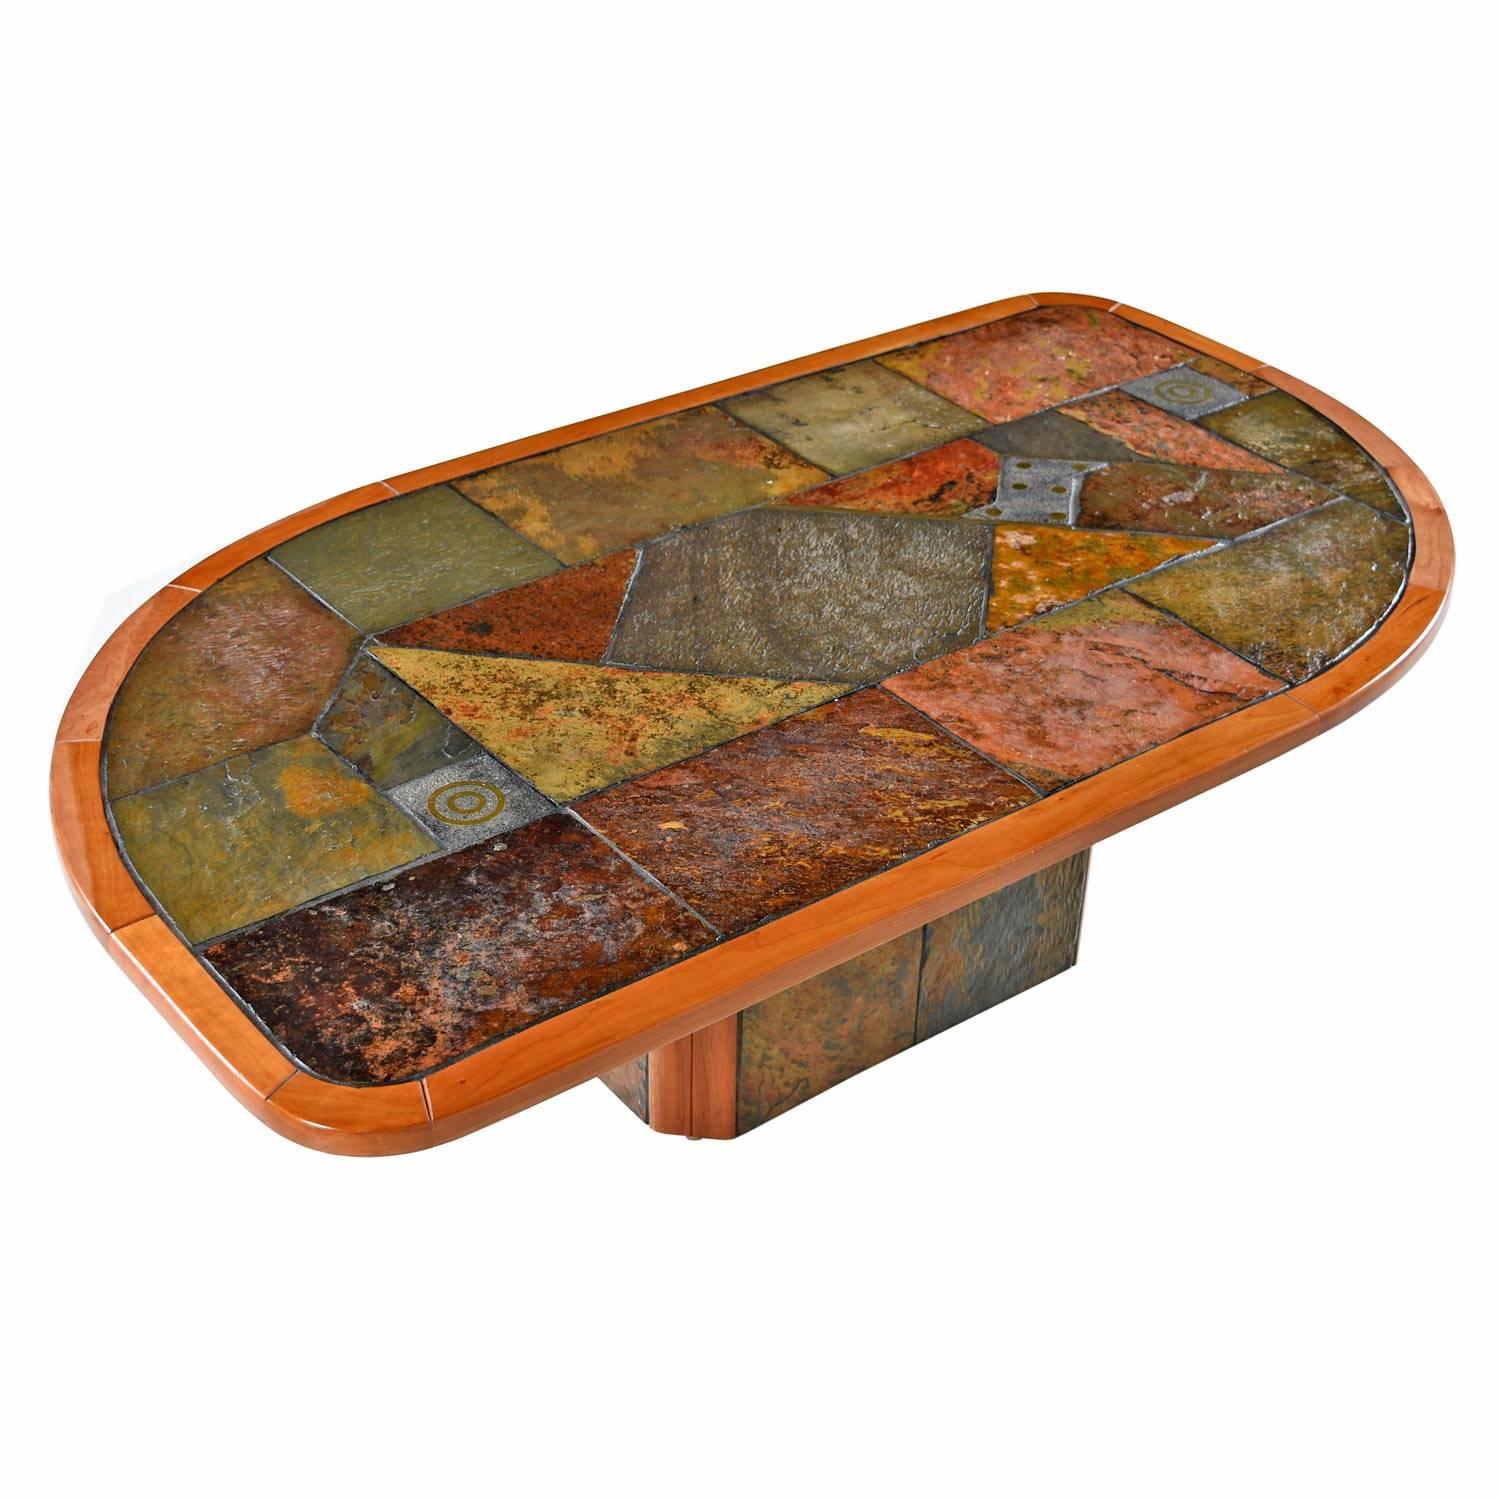 Made in South Africa, this bold and exotic coffee table succeeds in combining the right materials and design elements. The Brutalist style layout of multicolored and textured slate is punctuated with a minimal application of copper inlay. All tied